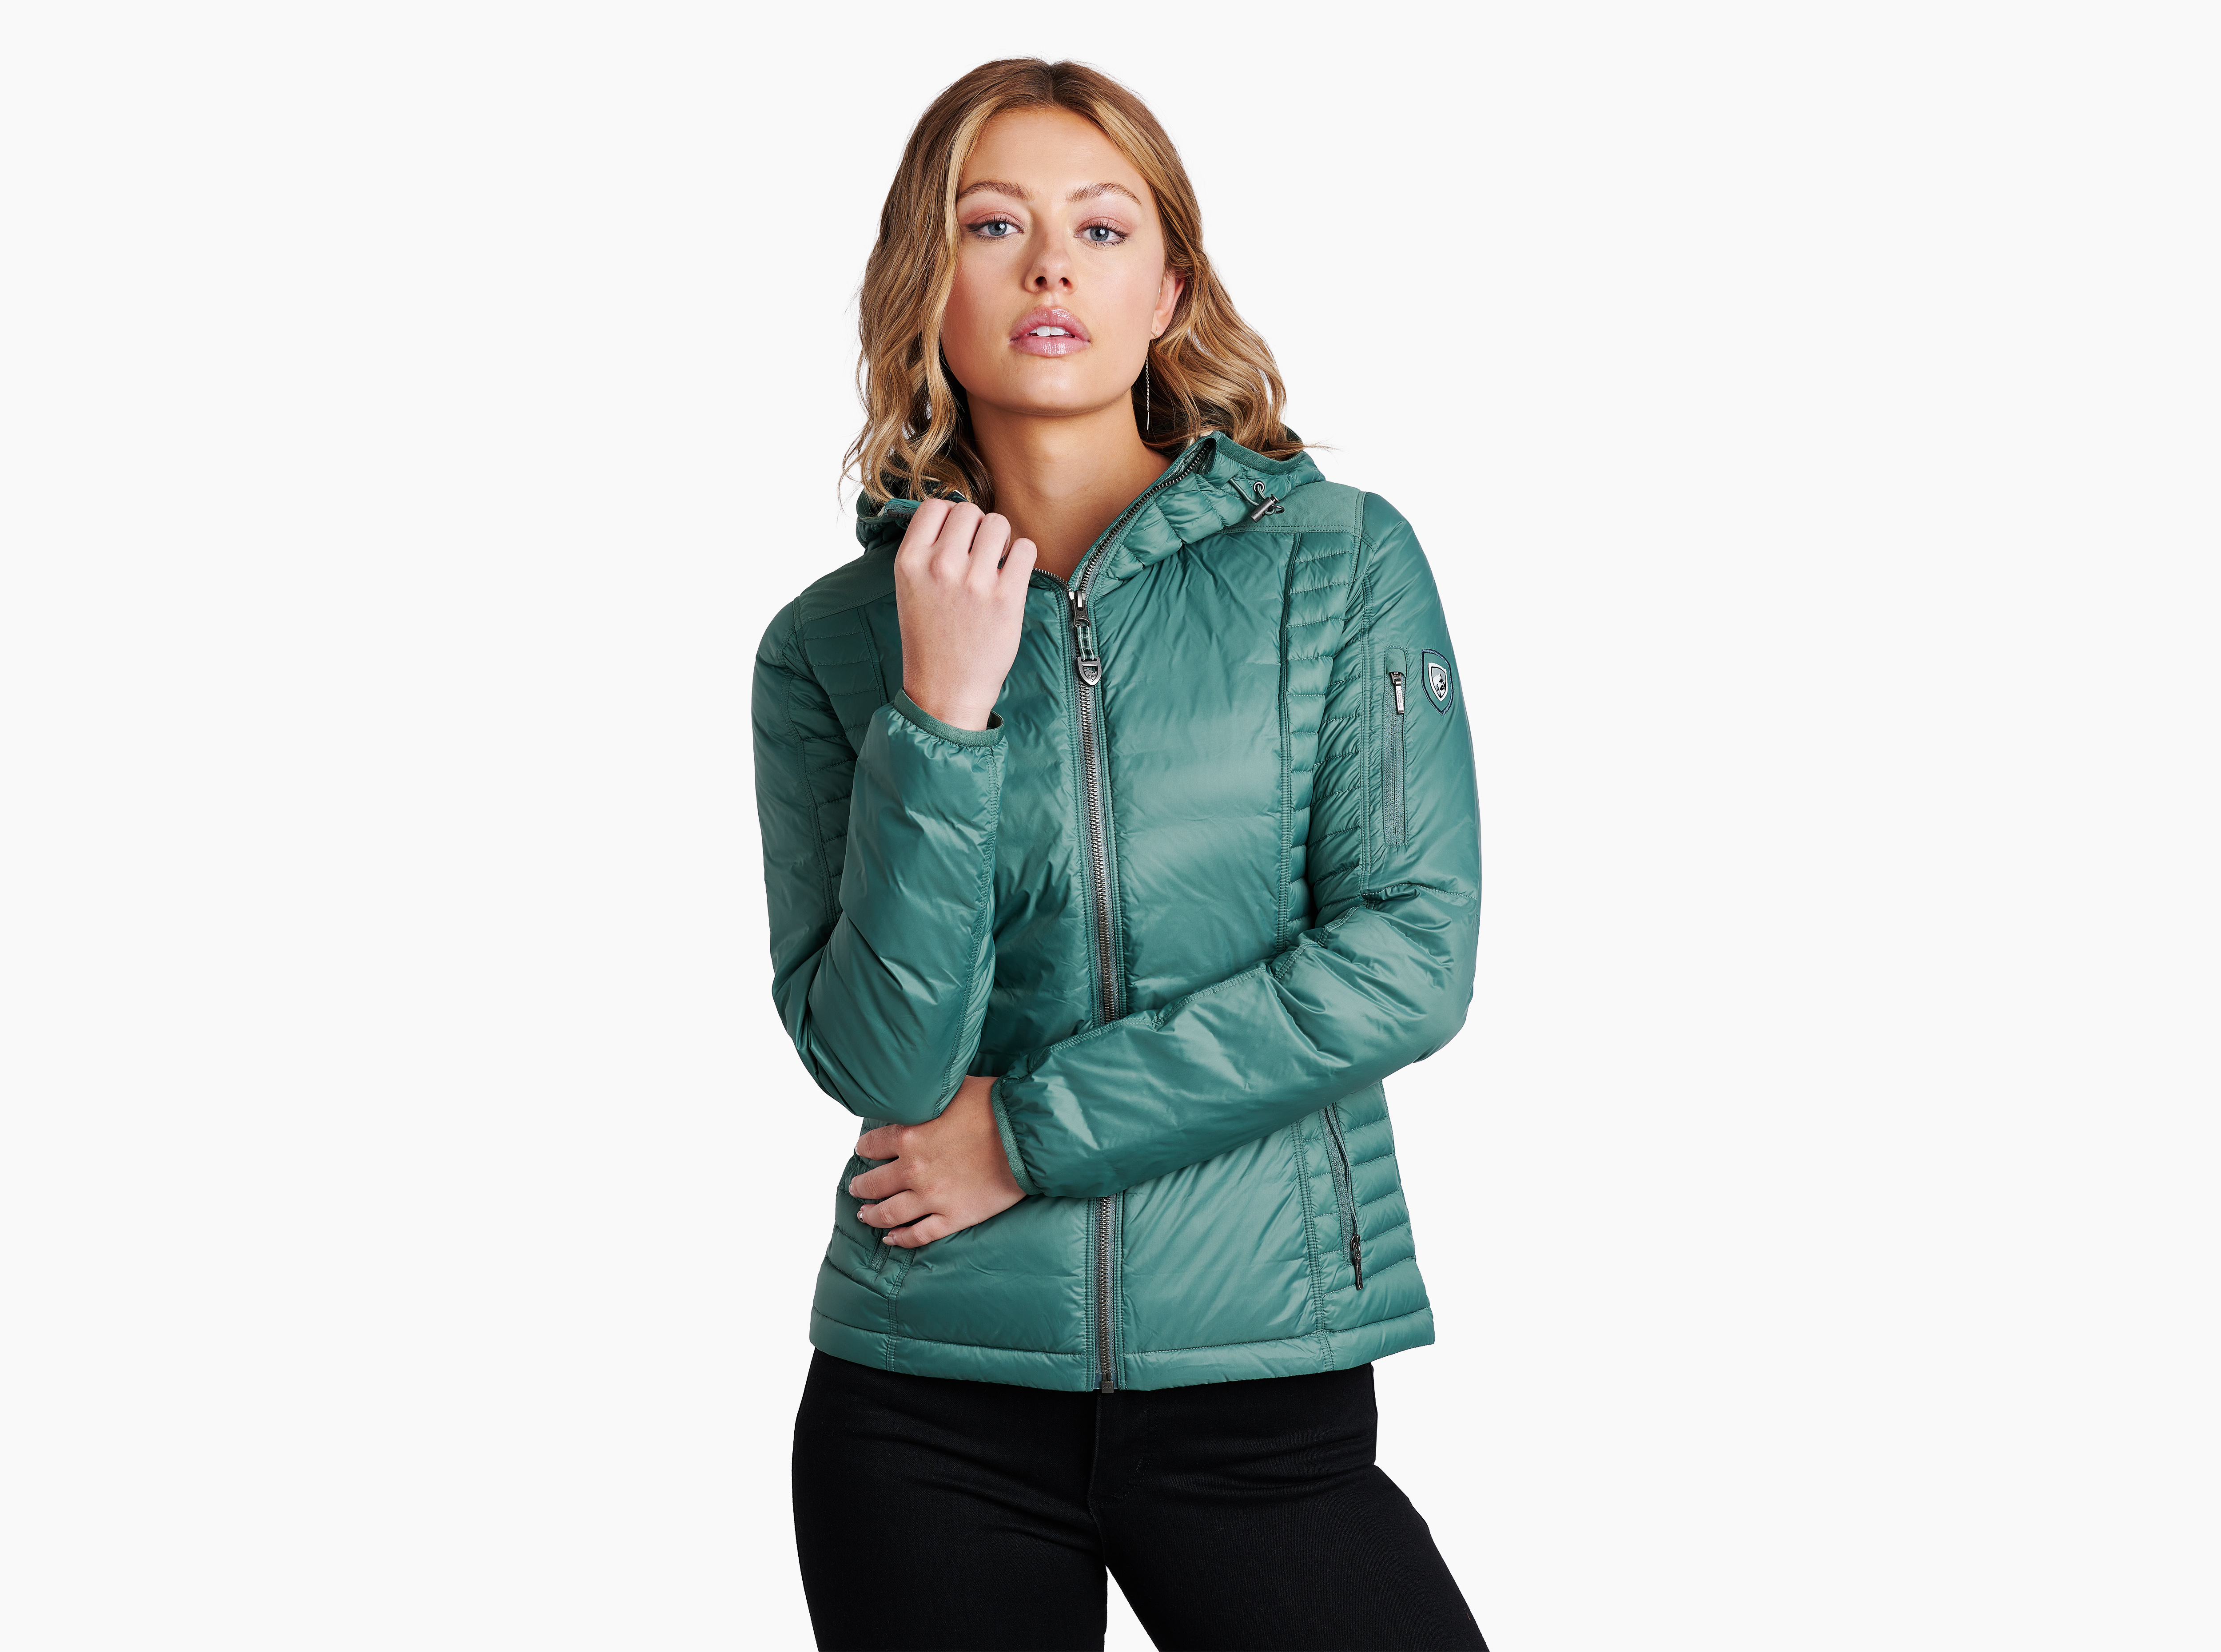 Need a jacket that transitions from trails to cocktails? The Kuhl Spyfire  women's down jacket doesn't skimp on details or style. Put this o…